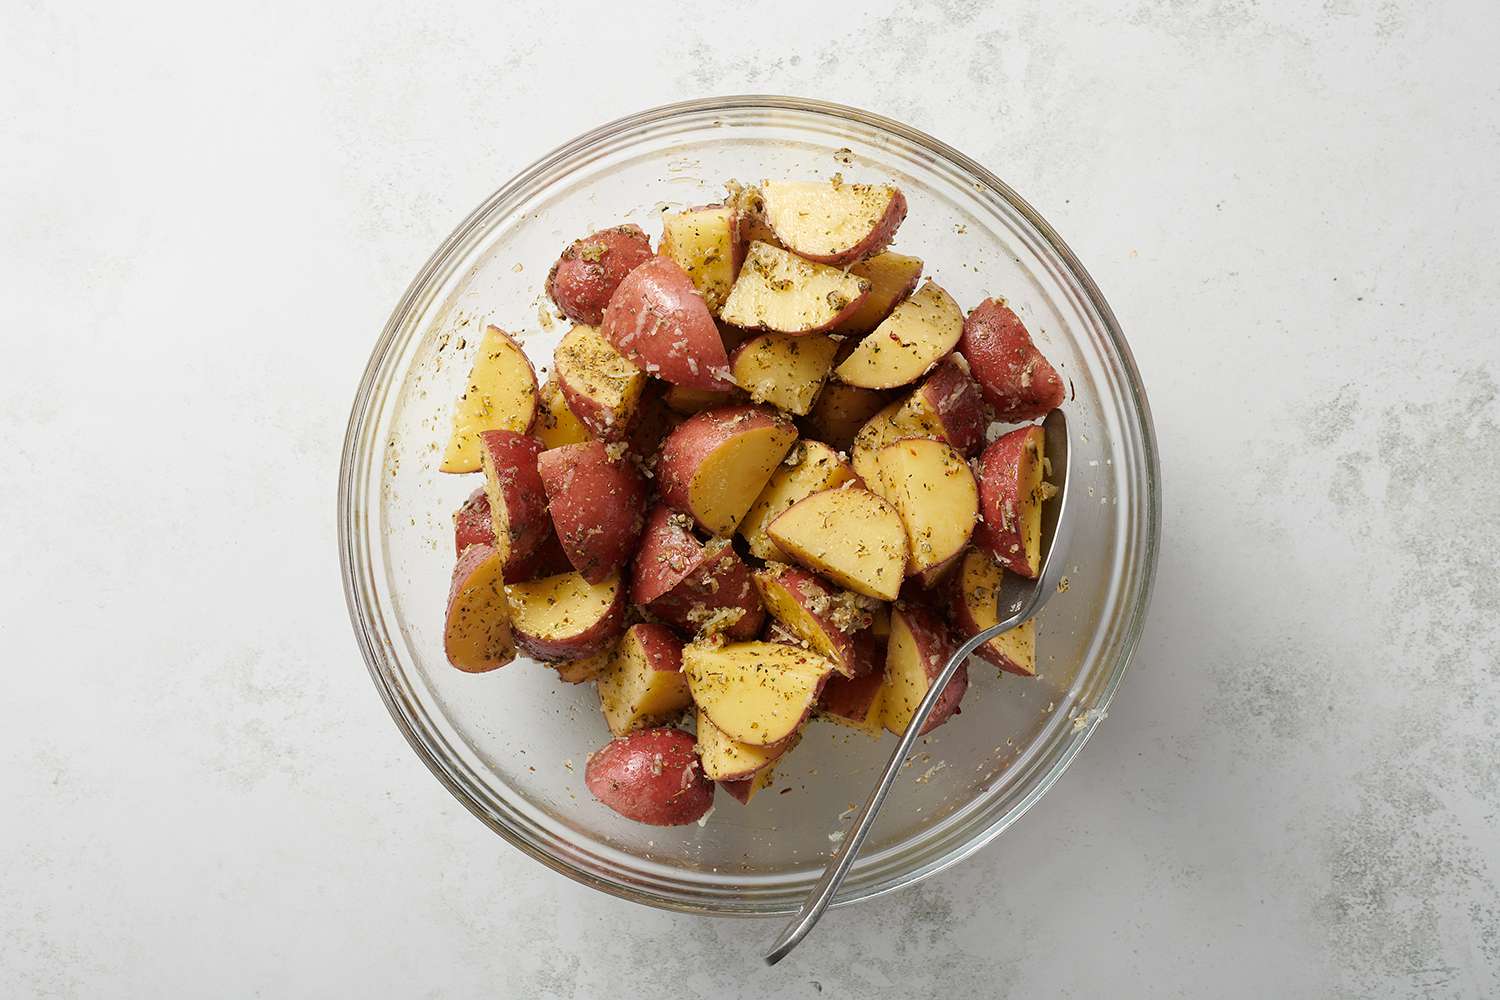 potatoes tossed with seasoning in a glass bowl